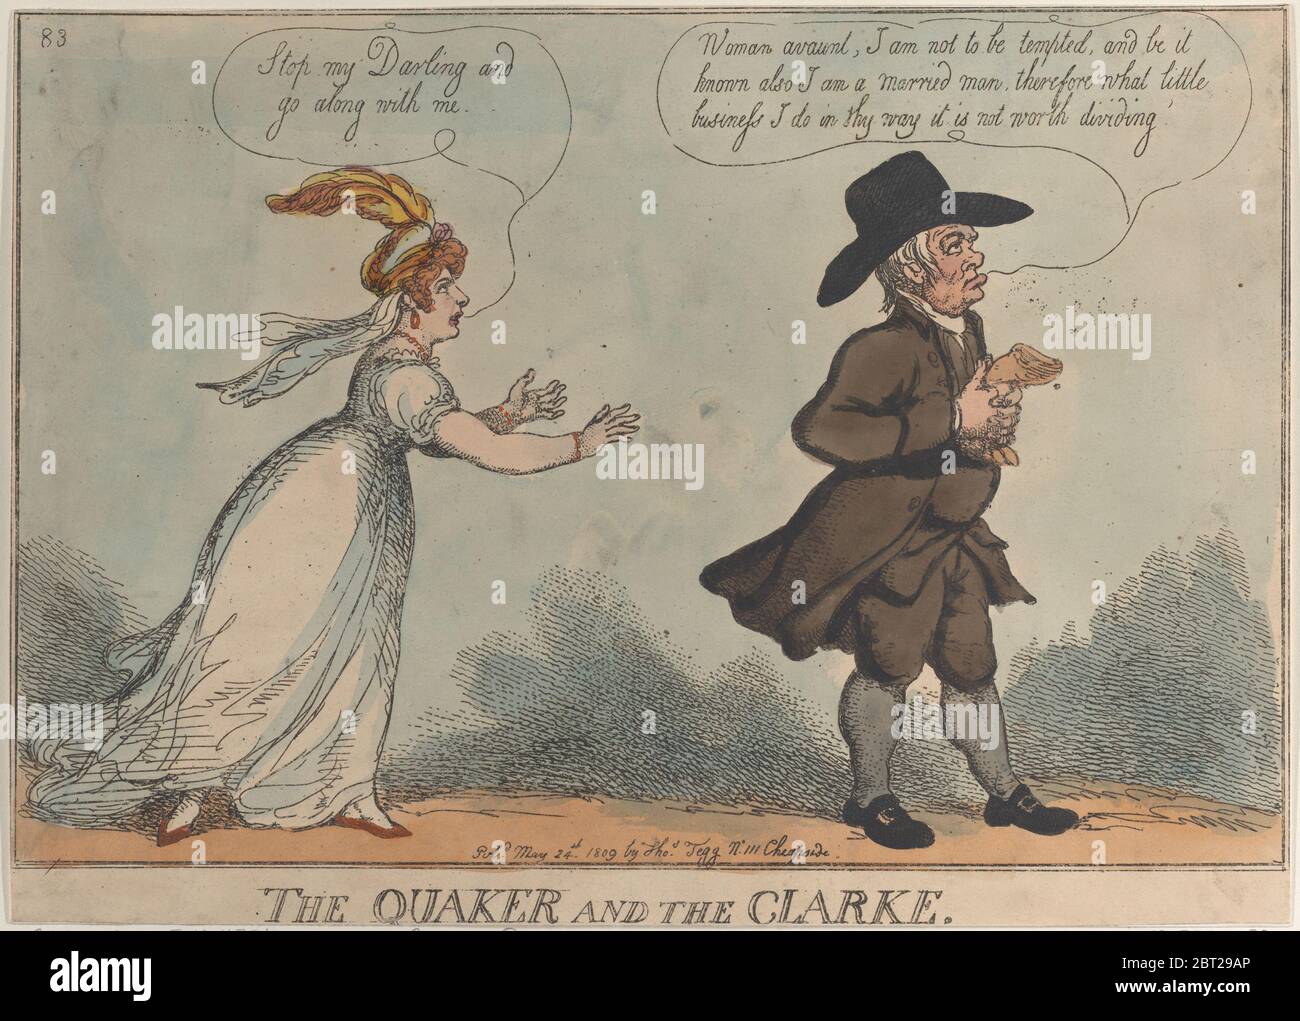 The Quaker and the Clarke, May 24, 1809. Stock Photo